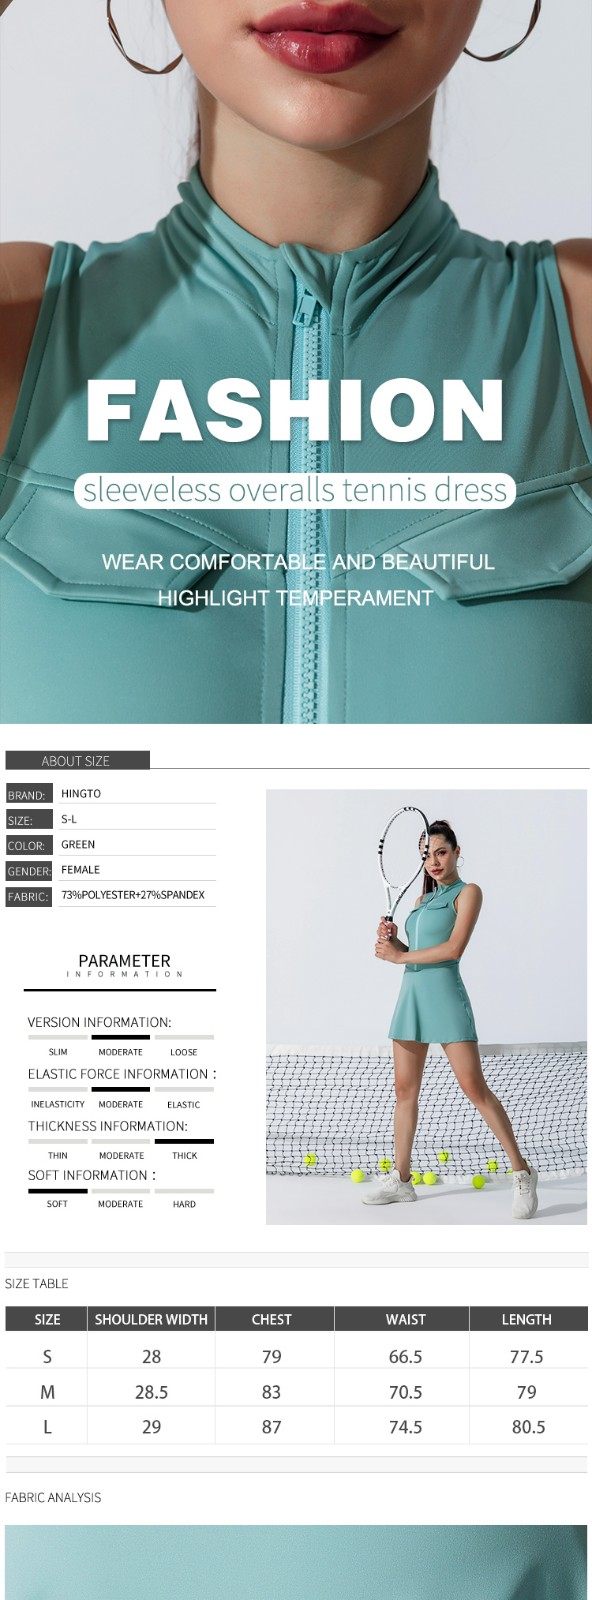 INGOR personalized woman tennis clothes supplier for ladies-2